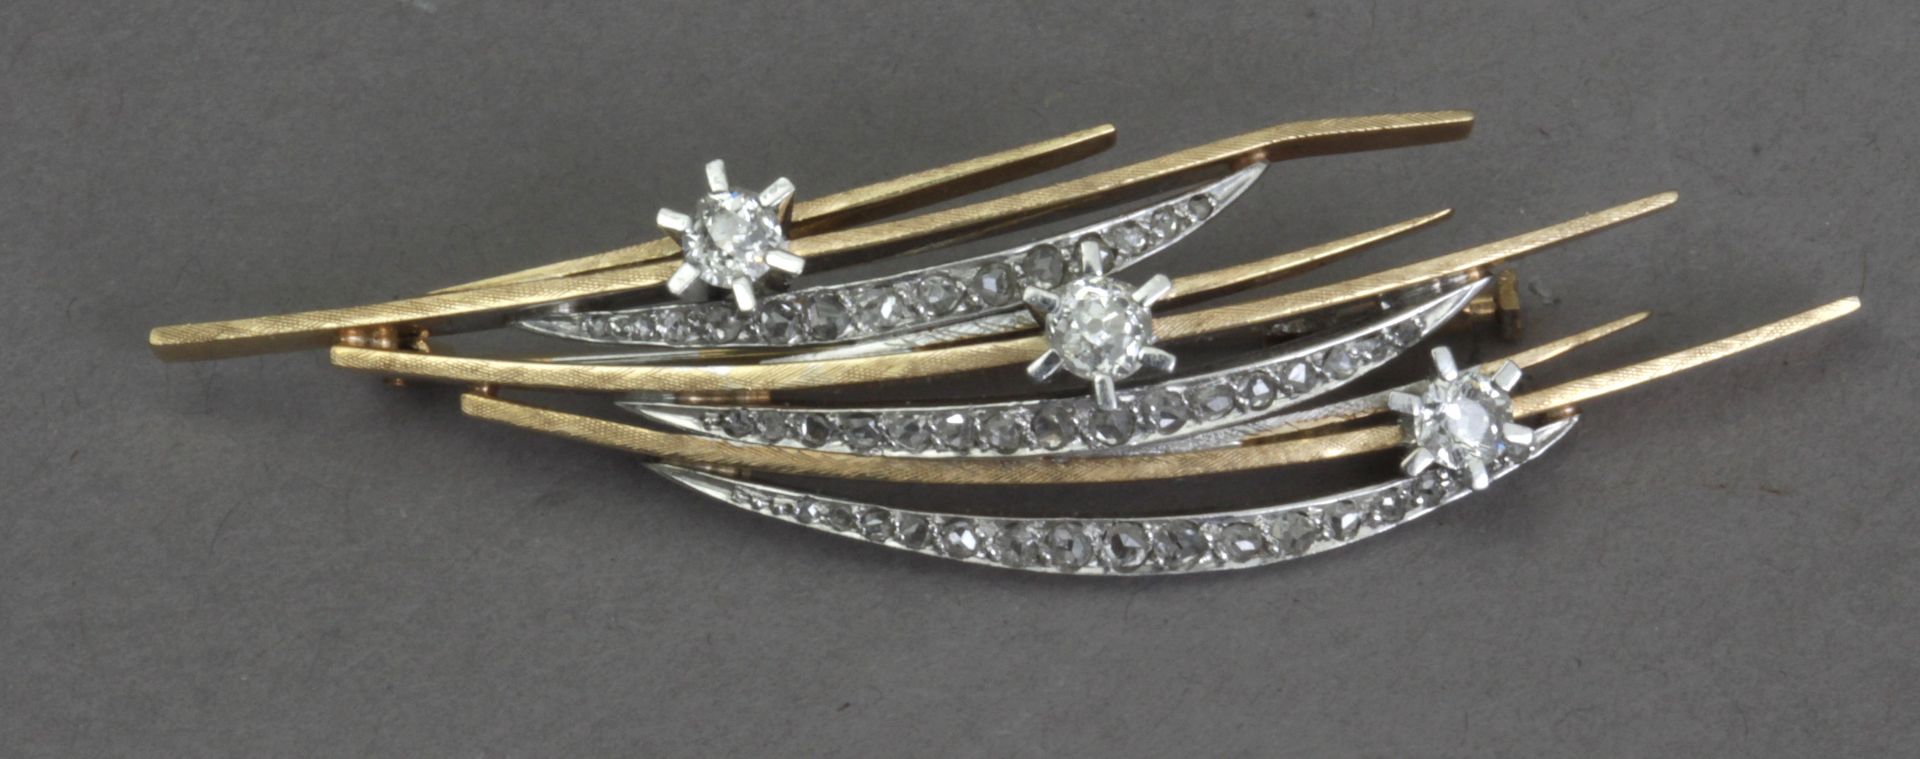 A diamond brooch with a gold setting